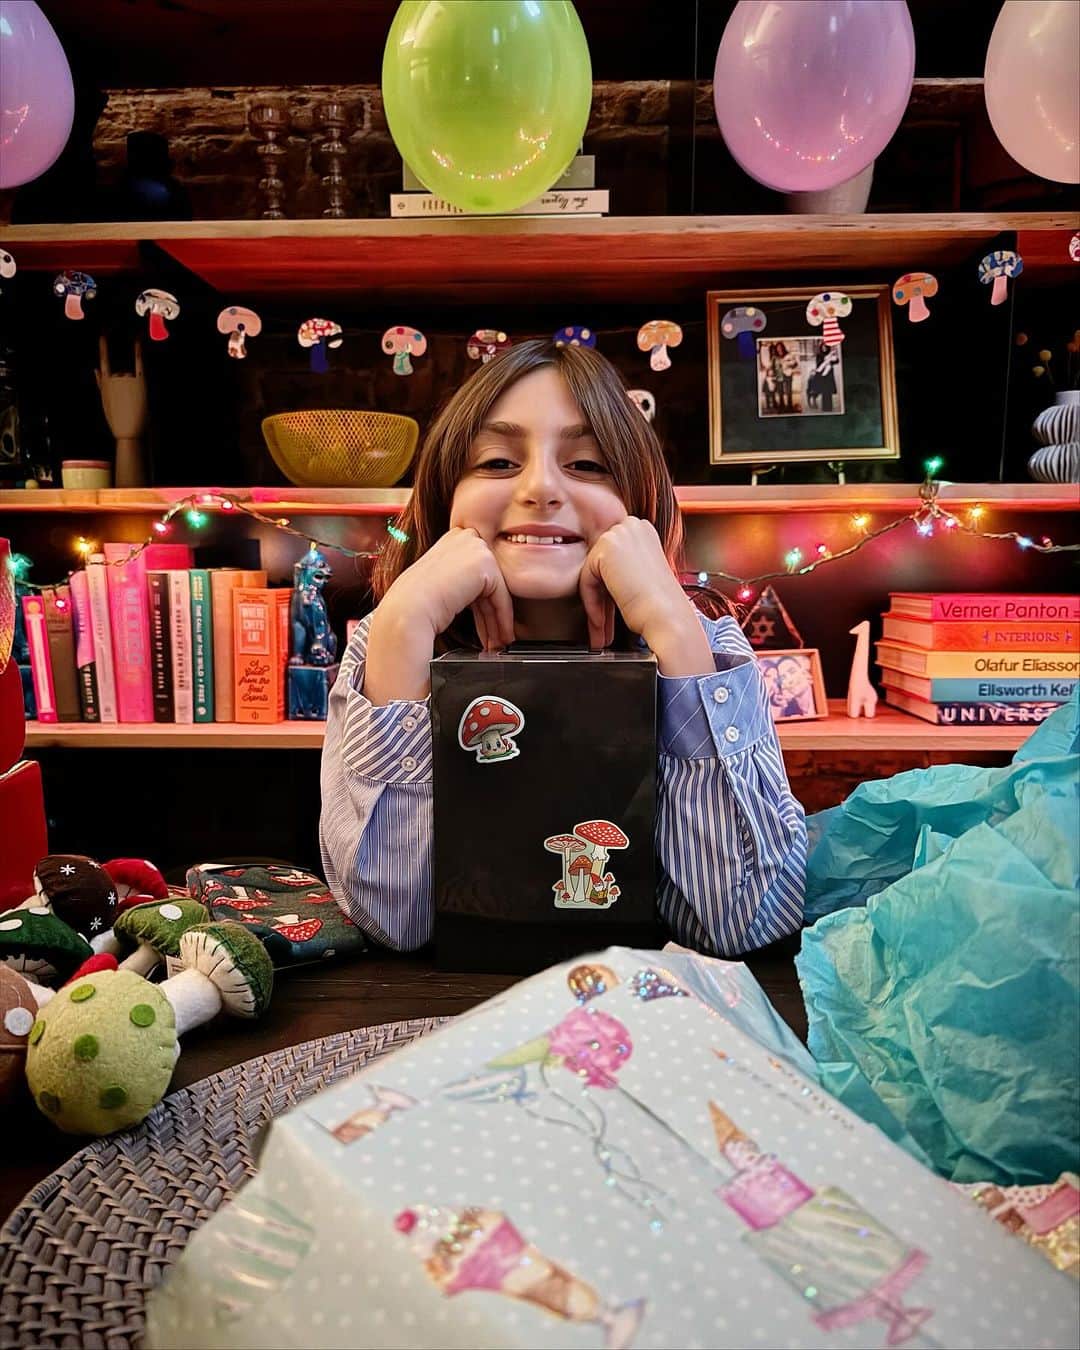 Ilana Wilesのインスタグラム：「Harlow is 11 today!!!!! 🎂🎉🥳 Before the day even started, she lost a tooth, cleaned up with some presents, debuted some new strawberry earrings, bought Dunkin Doughnuts for her whole class and downloaded the Starbucks app on her new phone to claim her free birthday drink. If there is anything I know about Harlow, it’s that when it comes to special occasions, she is a GIRL WITH A PLAN to make the absolute most of it. Happy birthday, my sweet girl. You deserve all the special things 💝」